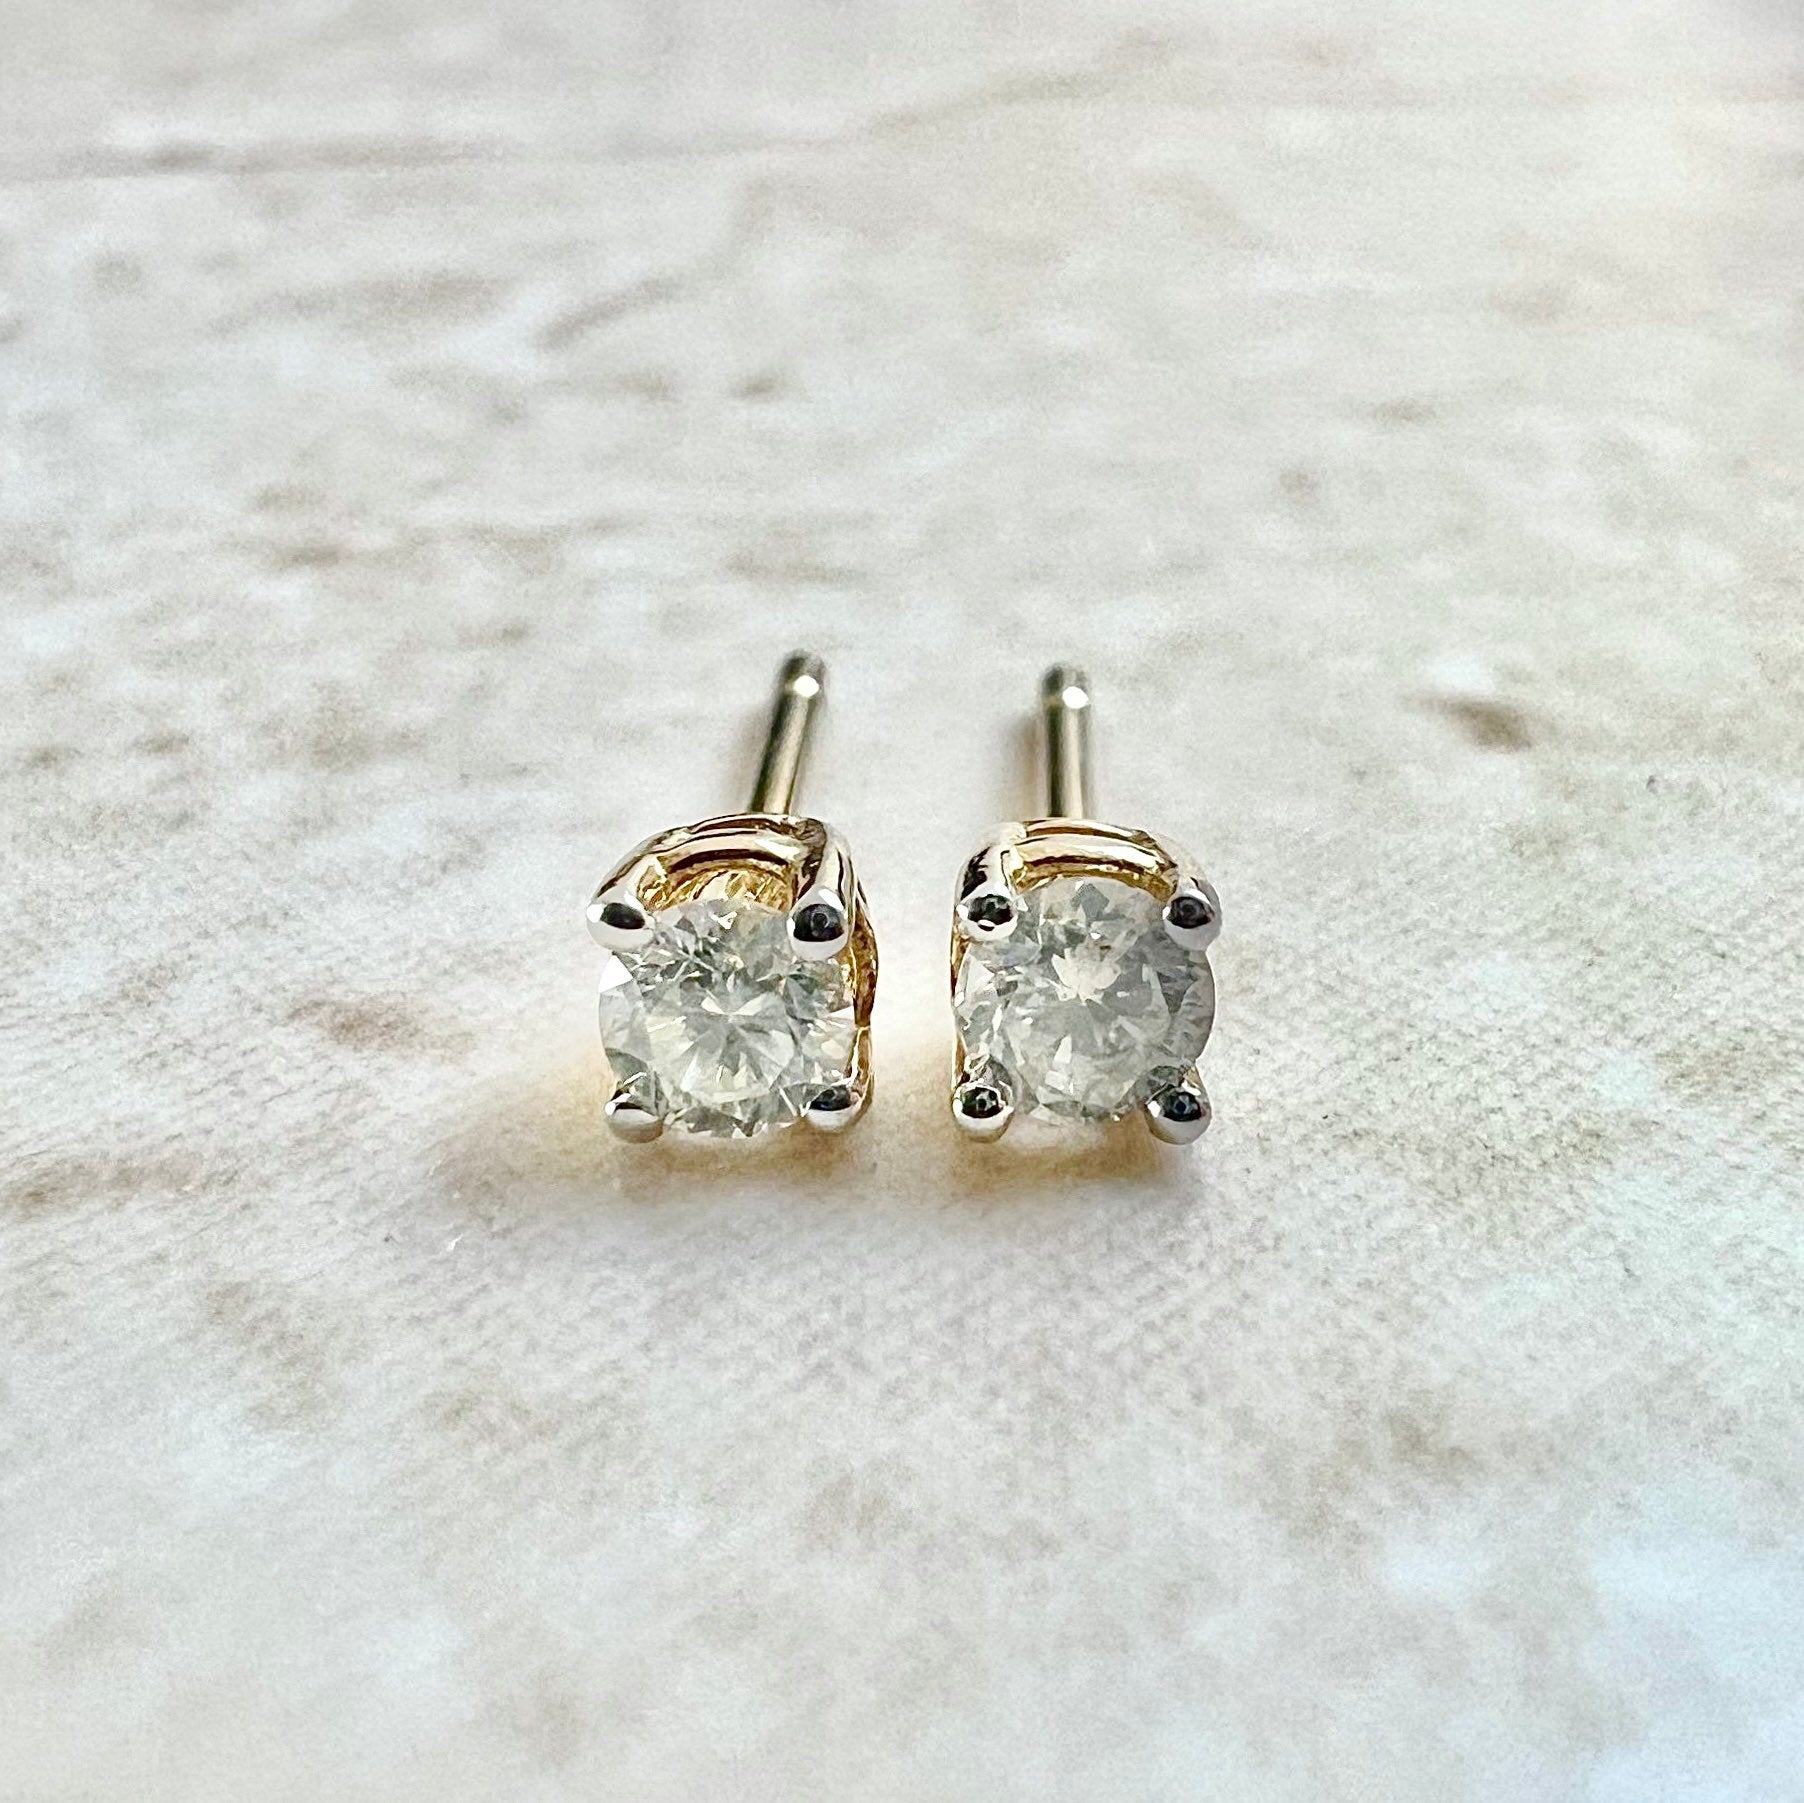 14 Karat Yellow Gold 0.20 CTTW Natural Diamond Stud Earrings With Push Backs - Gold Diamond Earrings - Birthday Gifts - Best Gifts For Her